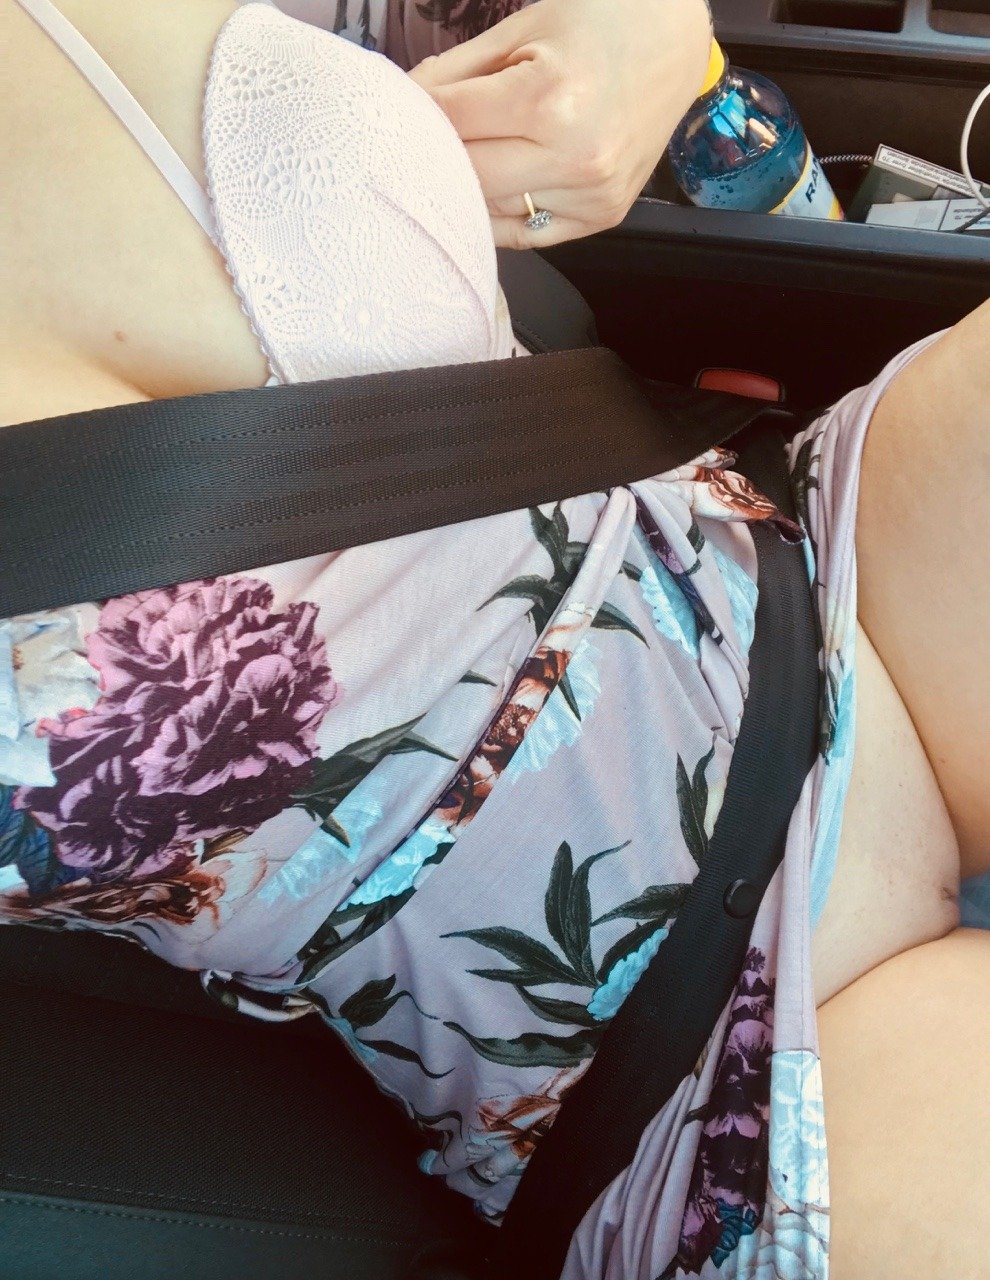 Watch the Photo by Cellulite & Pawg with the username @Cellulite, posted on January 29, 2019 and the text says 'Sweet view! #upskirt #pussy #car #hot'